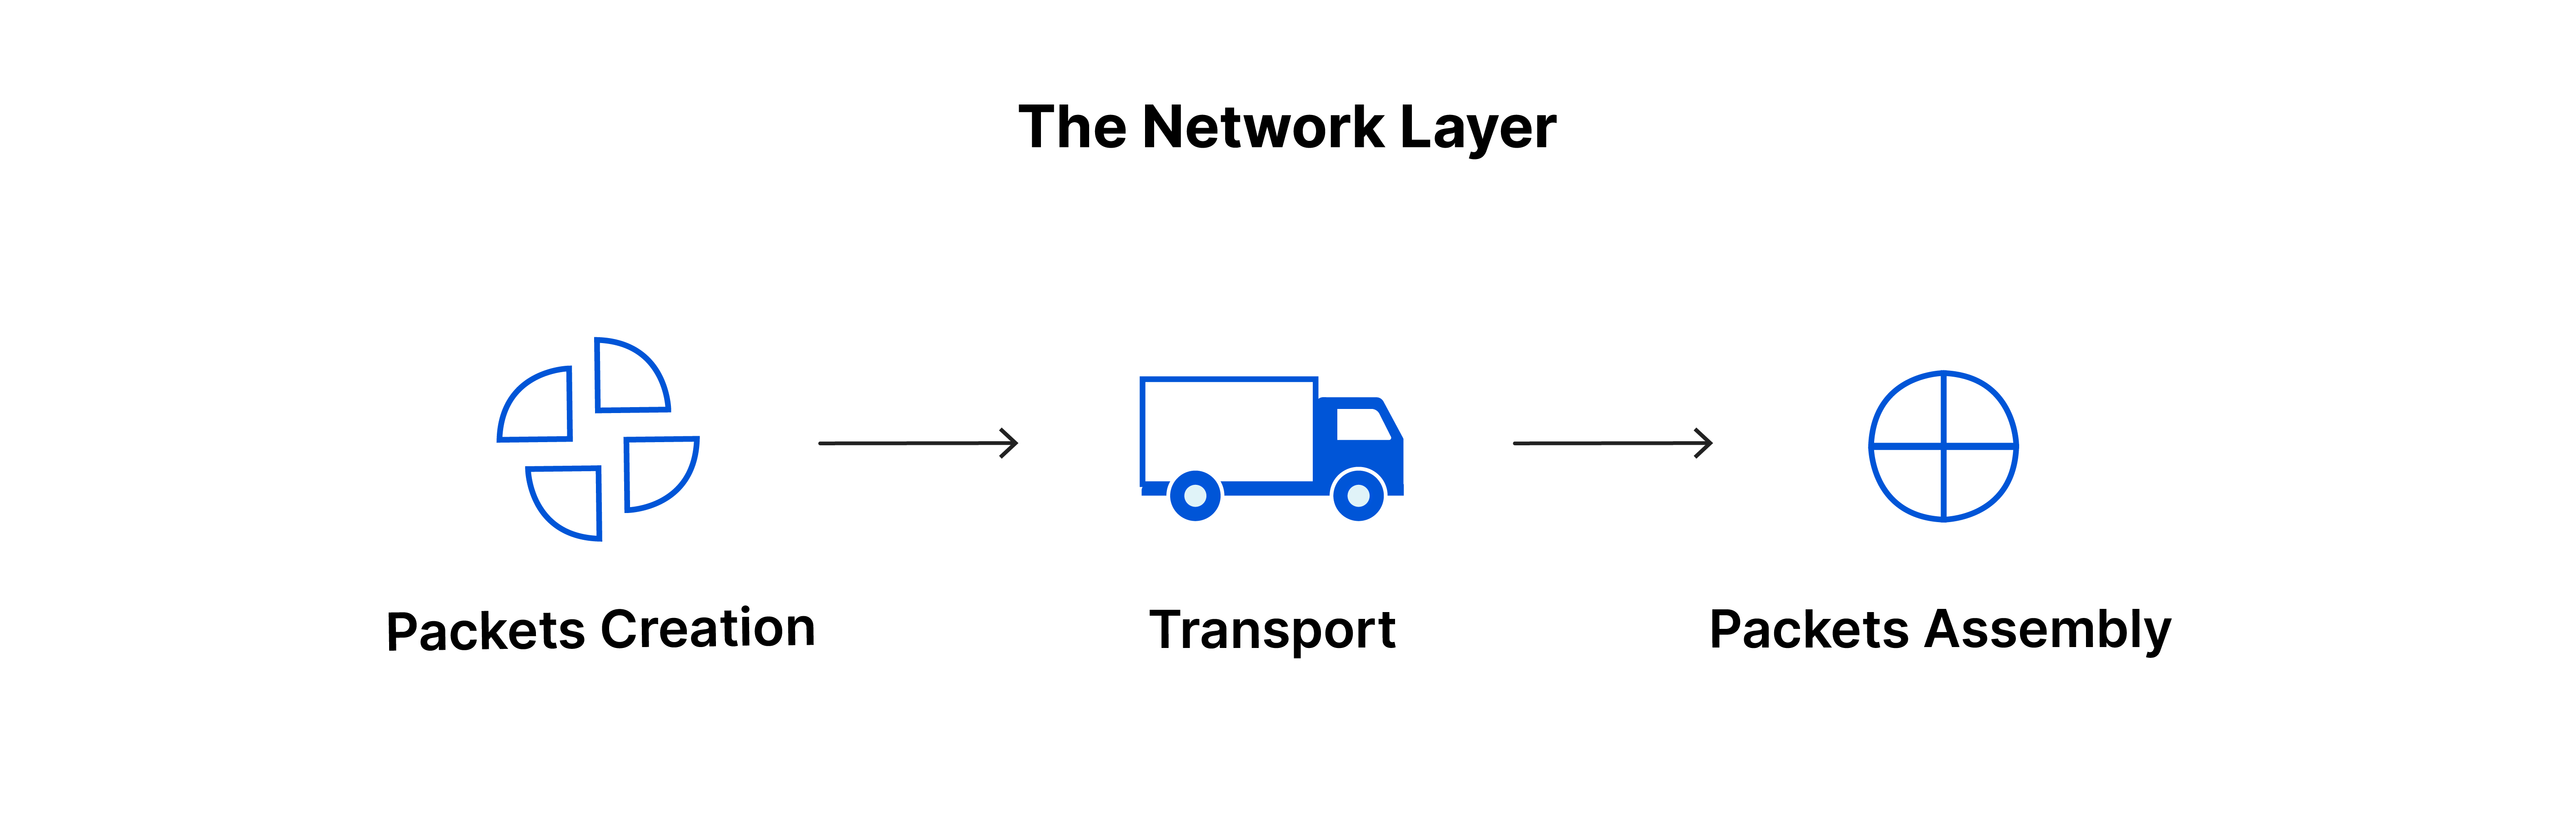 The Network Layer: packets creation, transport, packets assembly